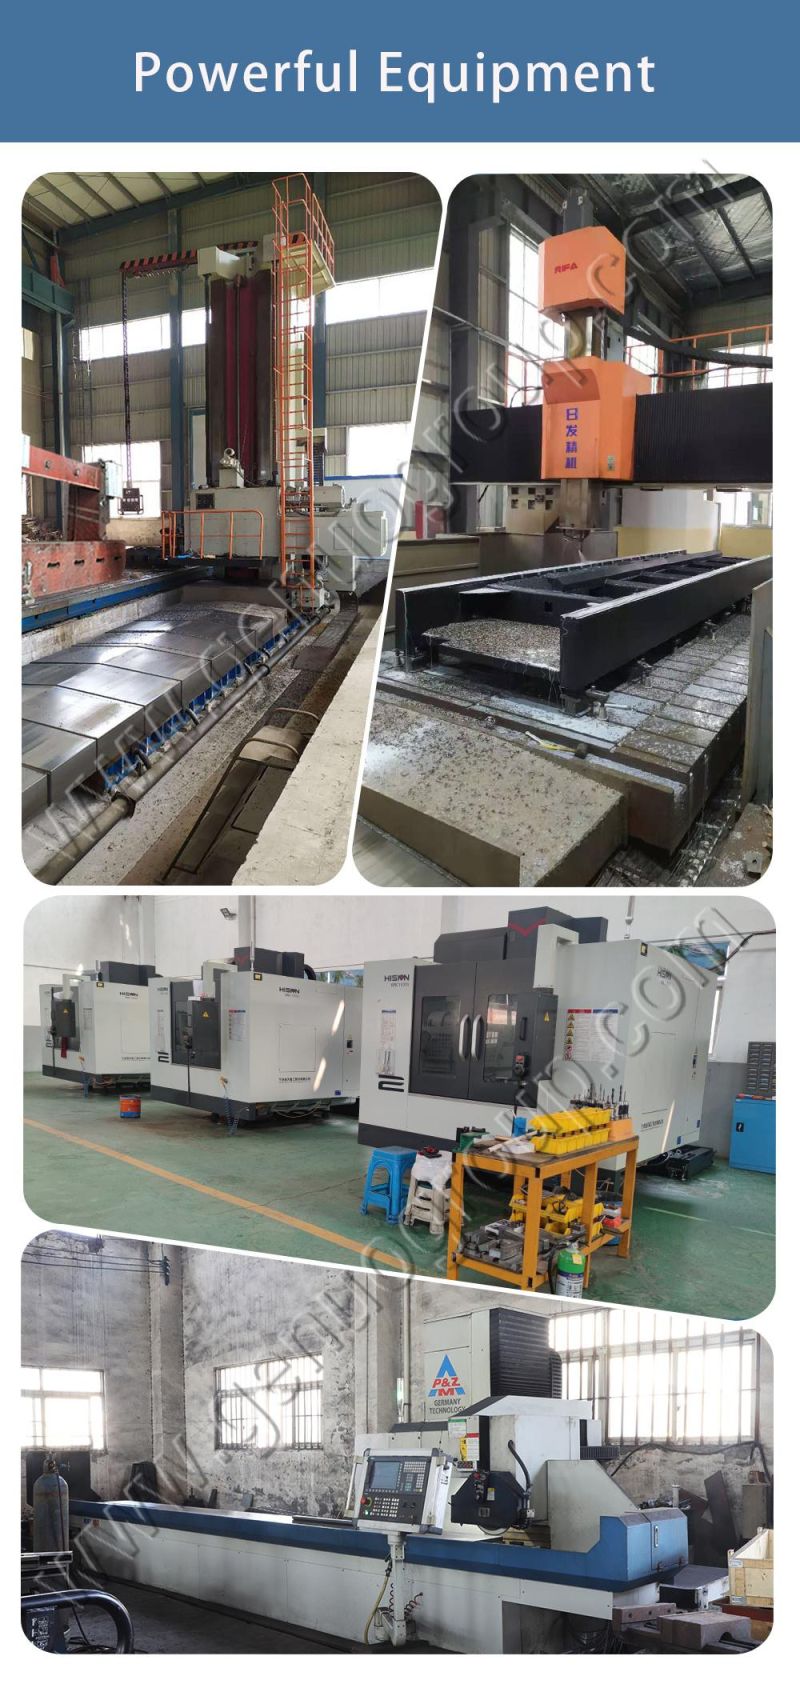 Gn 4015 LC 4000W Single Table Laser Cutting Machine